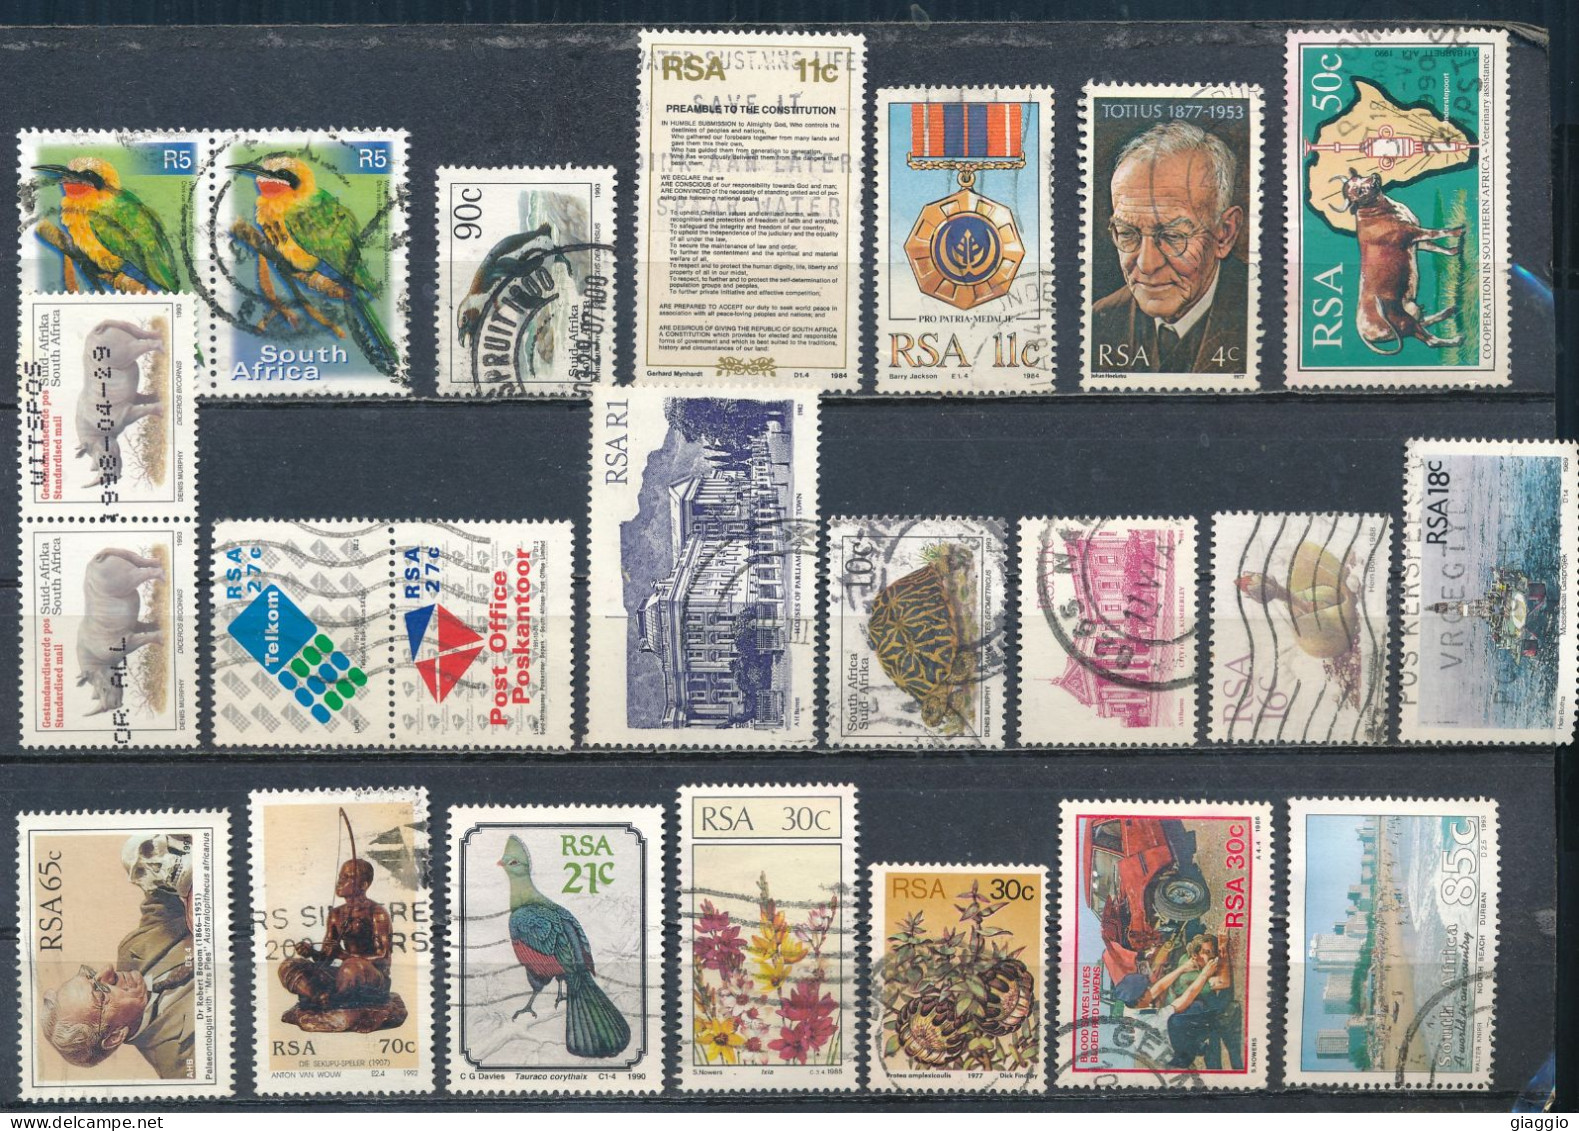 °°° LOT KILOWARE SOUTH AFRICA - FINE USED °°° - Used Stamps